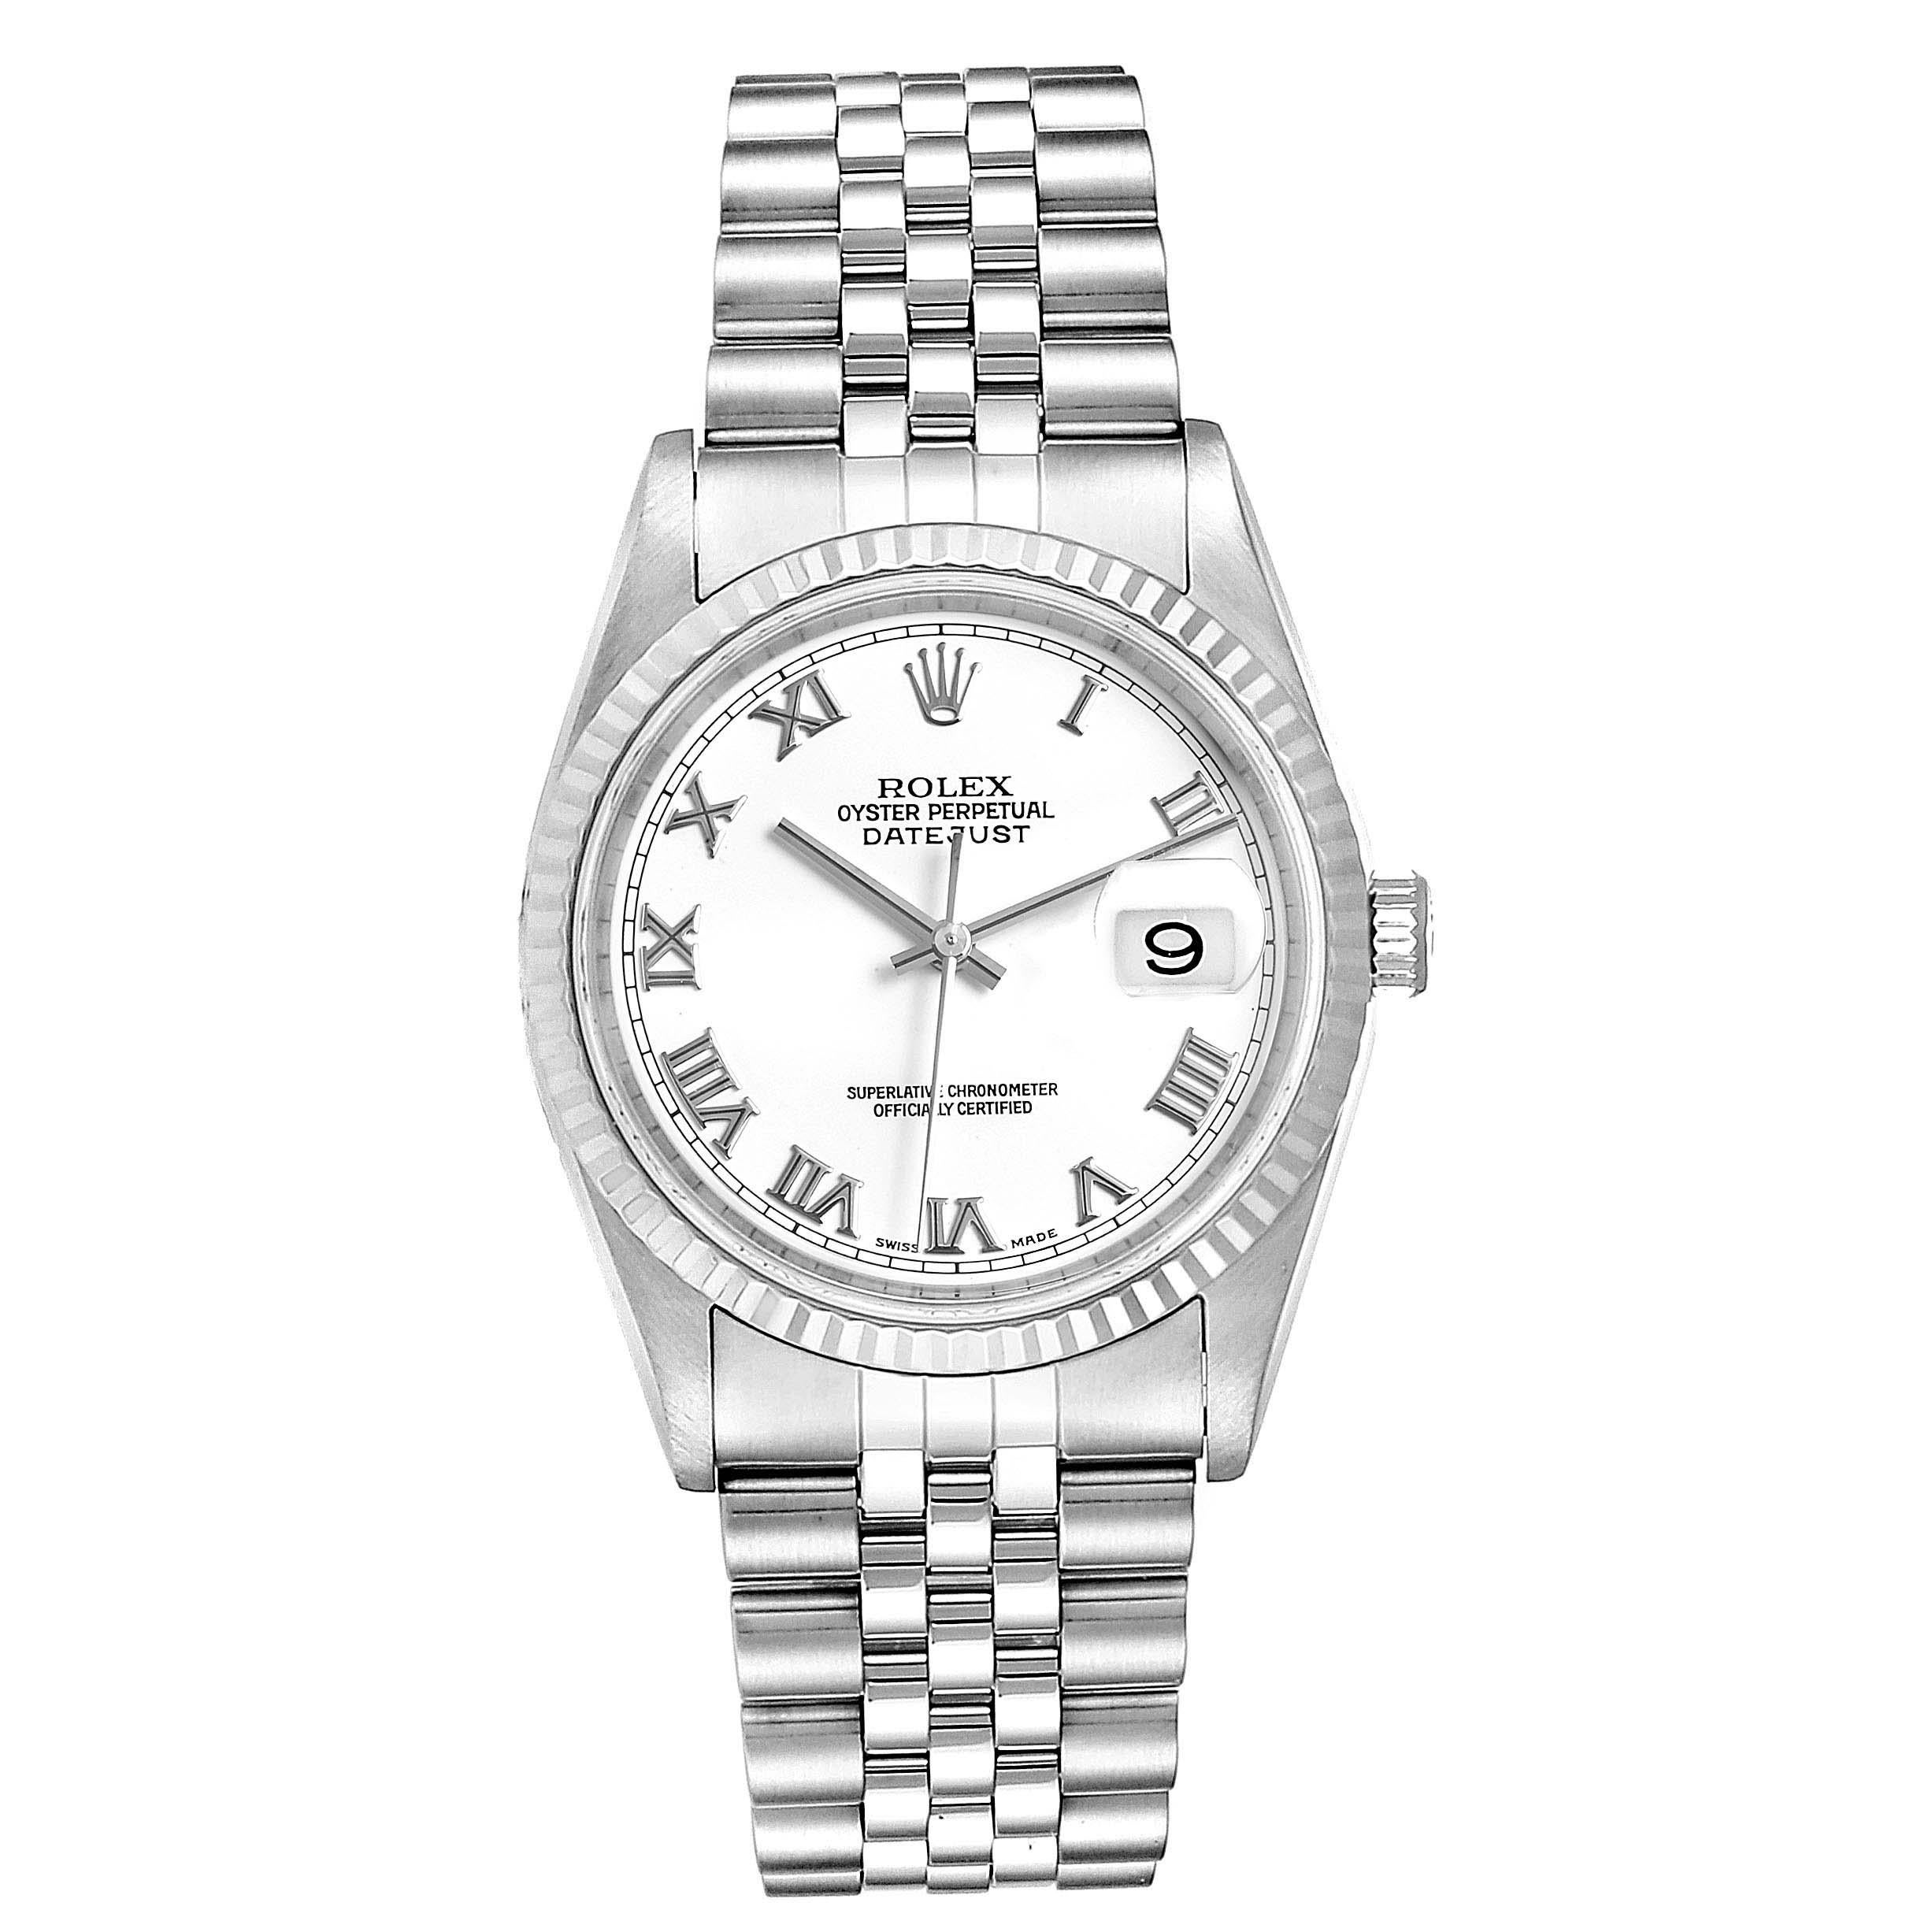 Rolex Datejust 36 Steel White Gold Fluted Bezel Mens Watch 16234. Officially certified chronometer self-winding movement. Stainless steel oyster case 36 mm in diameter. Rolex logo on a crown. 18k white gold fluted bezel. Scratch resistant sapphire